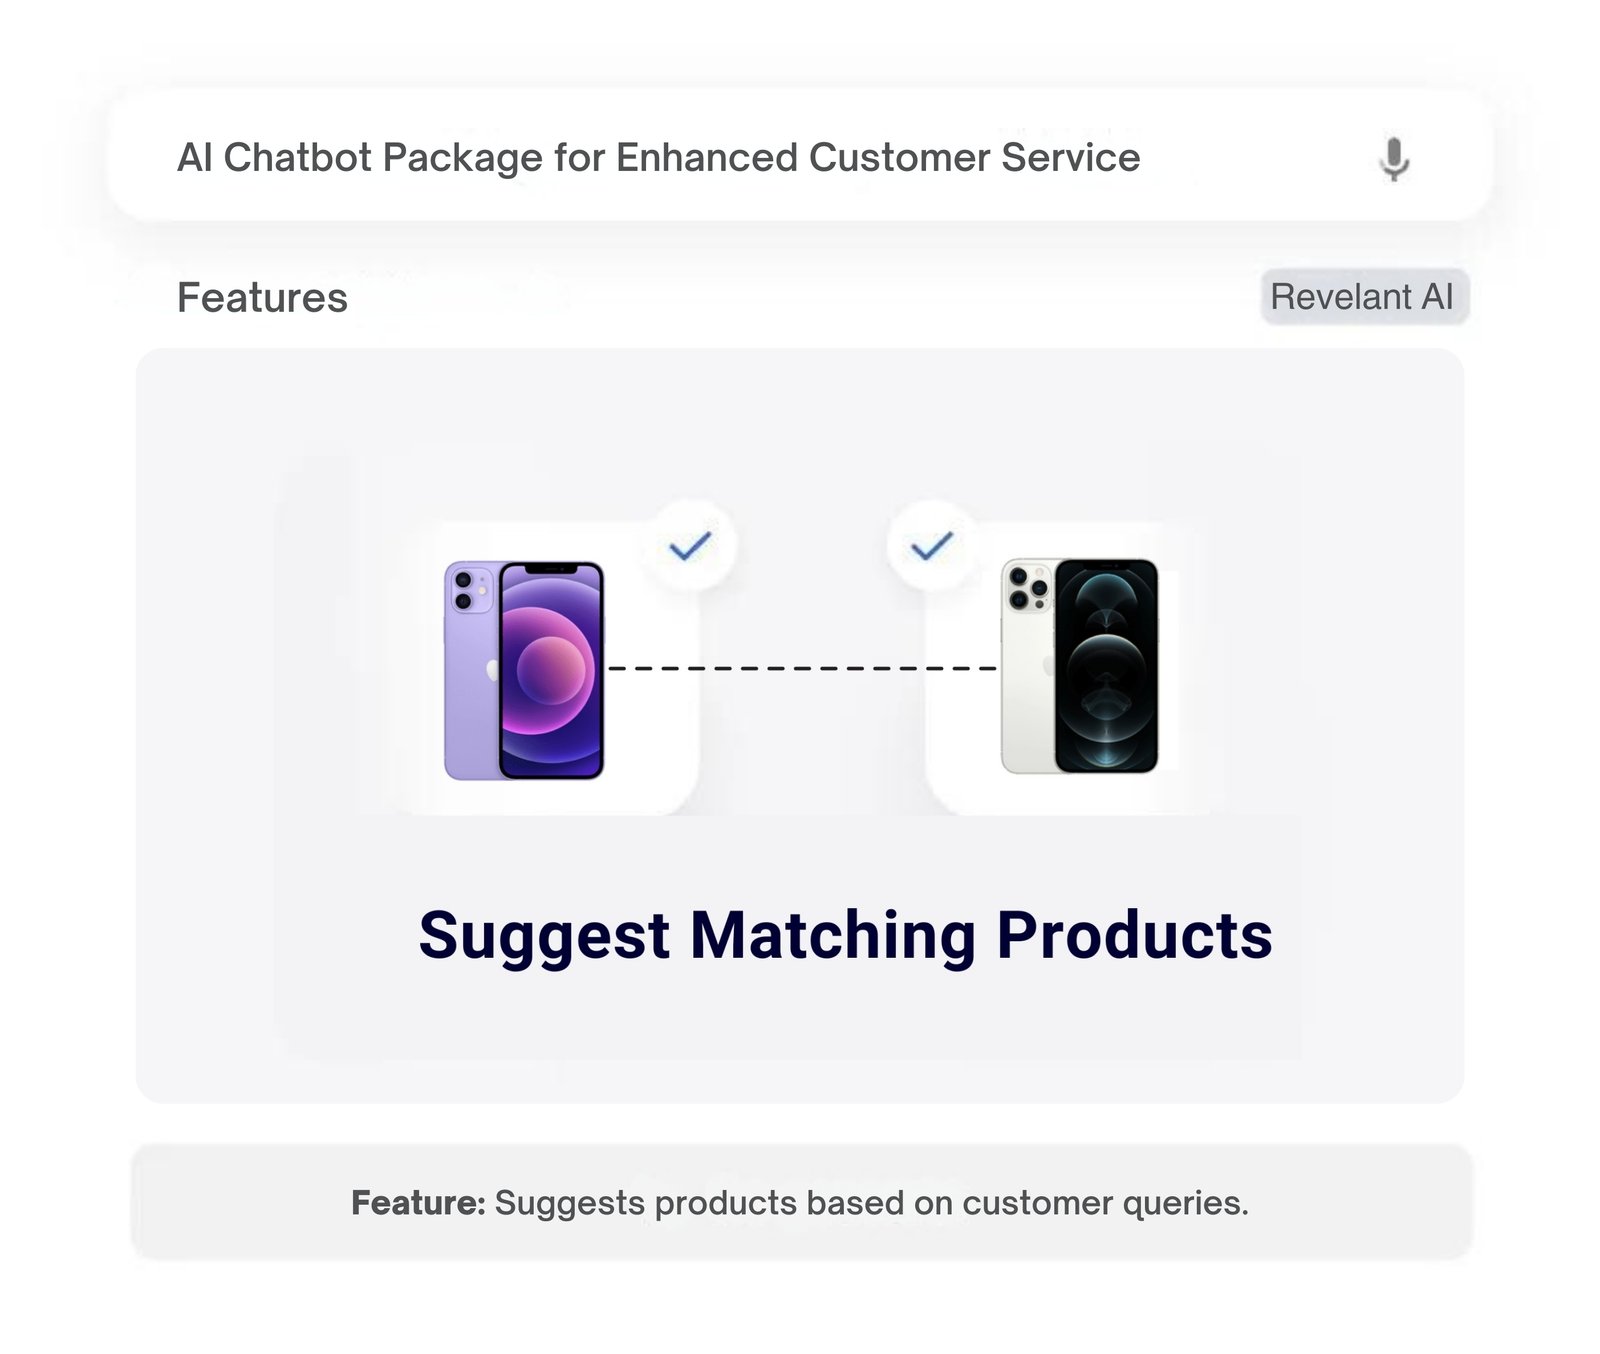 AI chatbot feature for suggesting matching products based on customer queries.